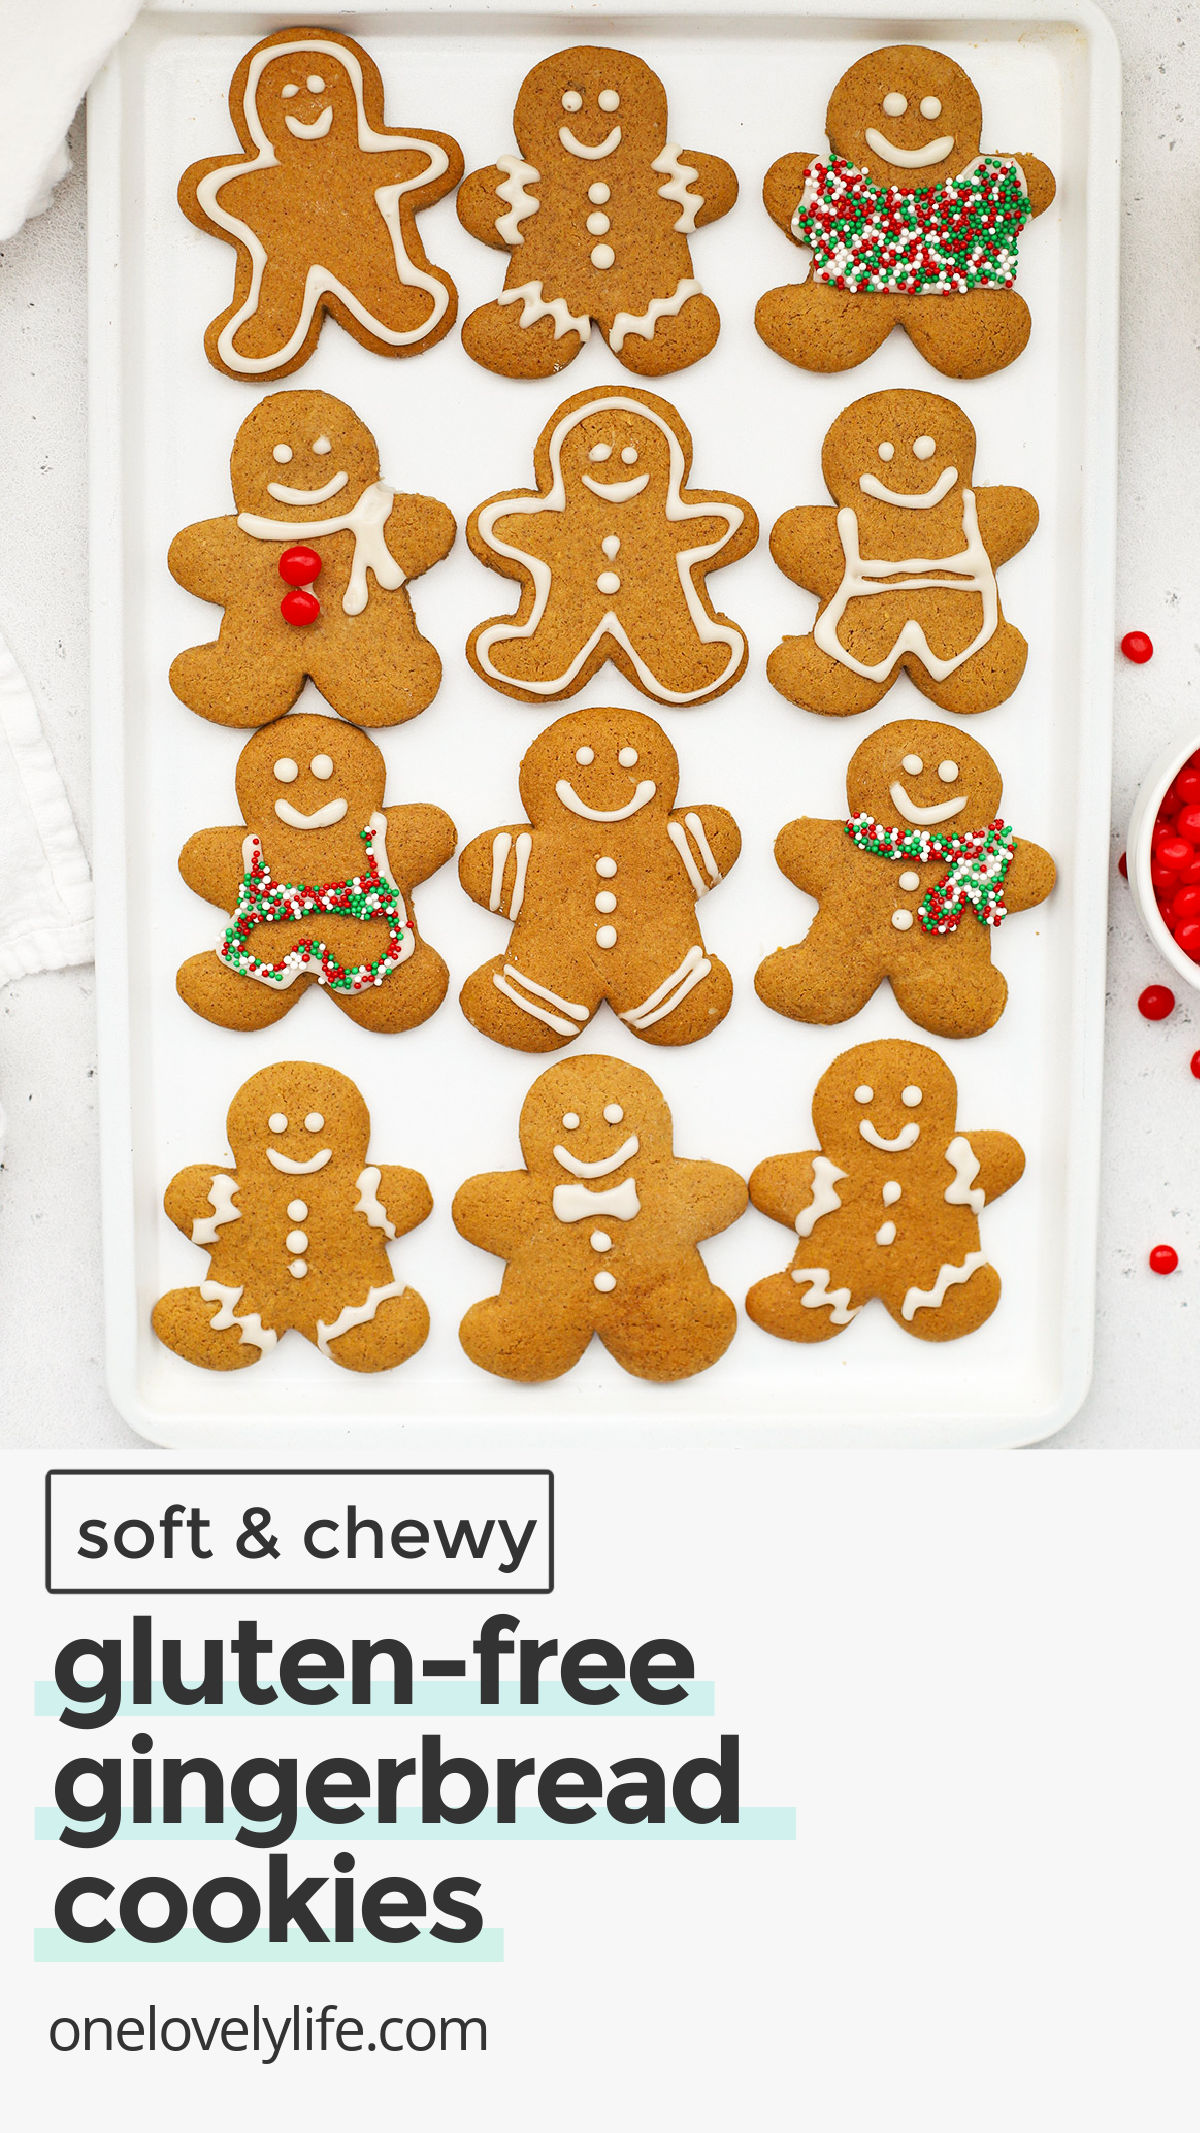 Gluten-Free Gingerbread Cookies - These soft gluten-free gingerbread cookies are the perfect holiday treat. Use this dough to make gluten-free gingerbread men, snowflakes, ornaments, trees, and more! // Gluten Free Holiday Cookies // Gluten Free Christmas Cookies // Gluten Free Gingerbread Recipe / The Best Gluten-Free Gingerbread Cookies